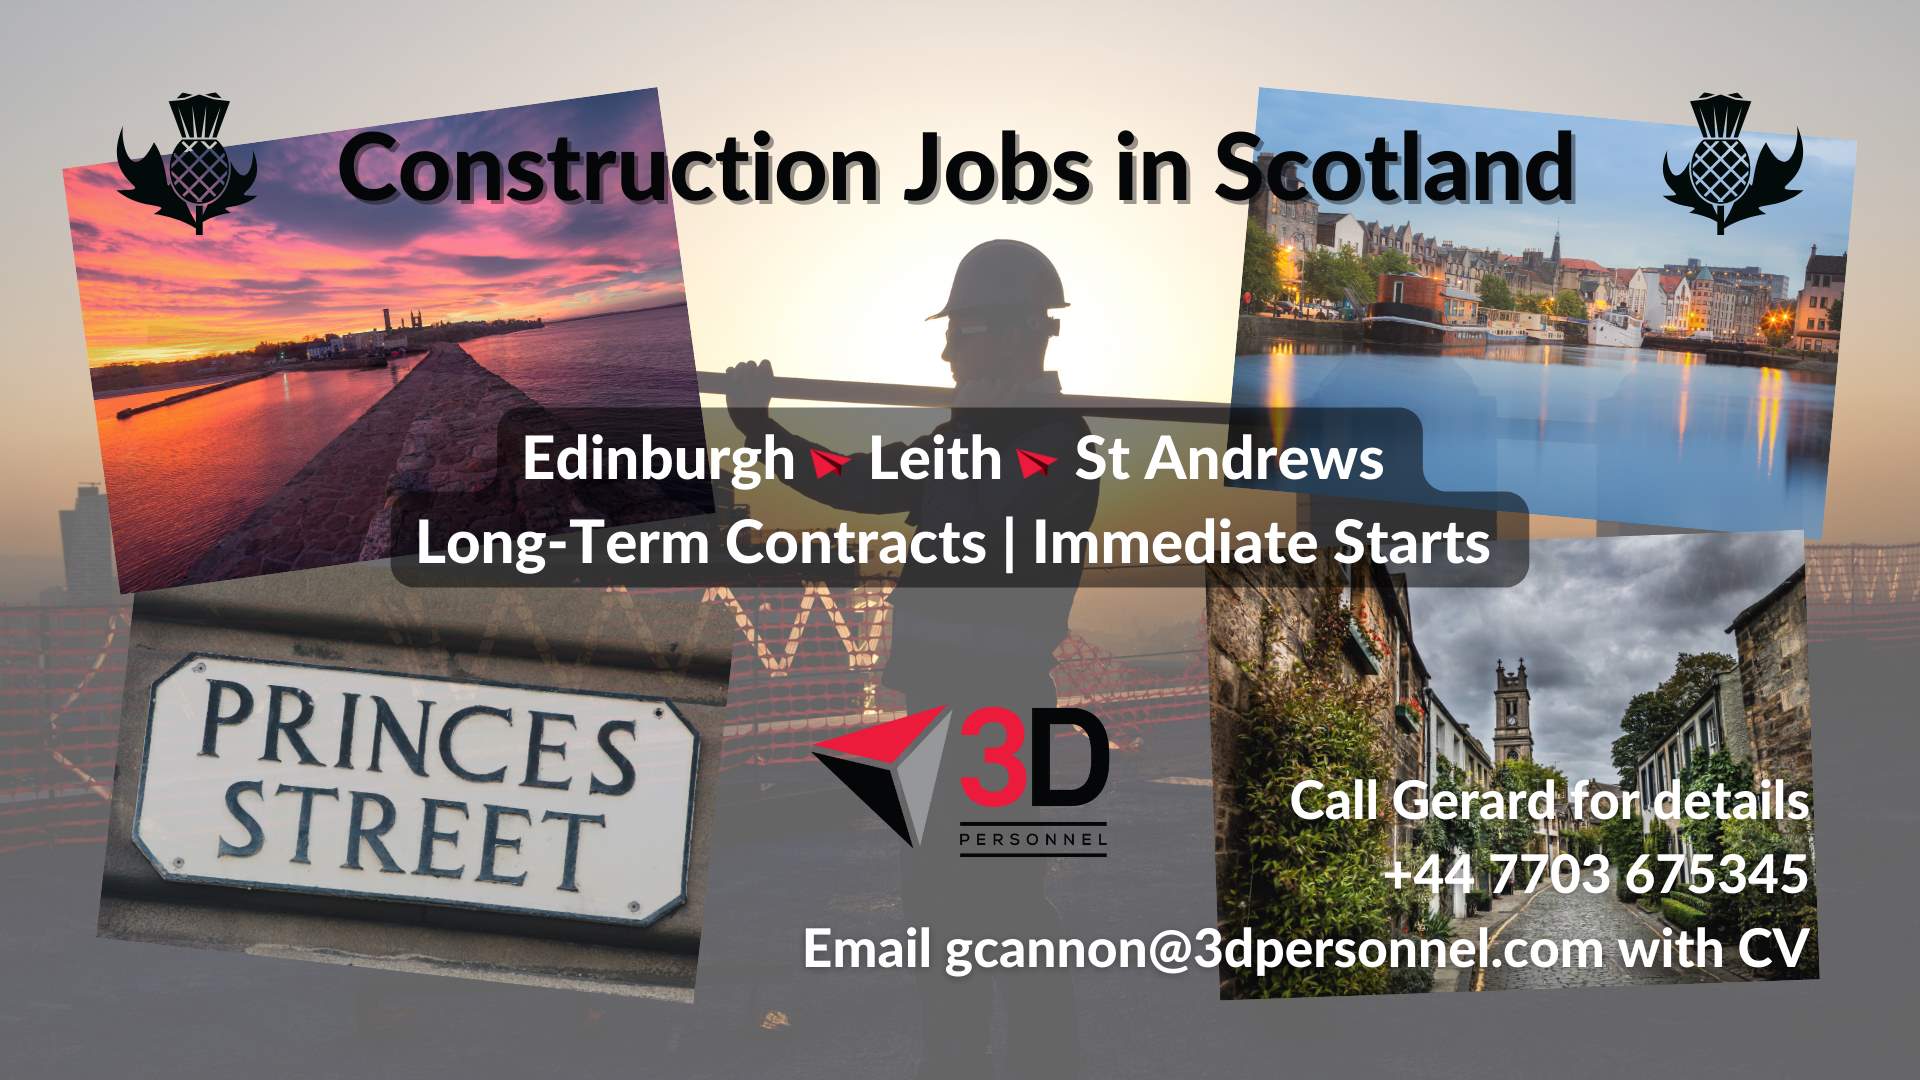 3D Construction Jobs in Scotland graphic